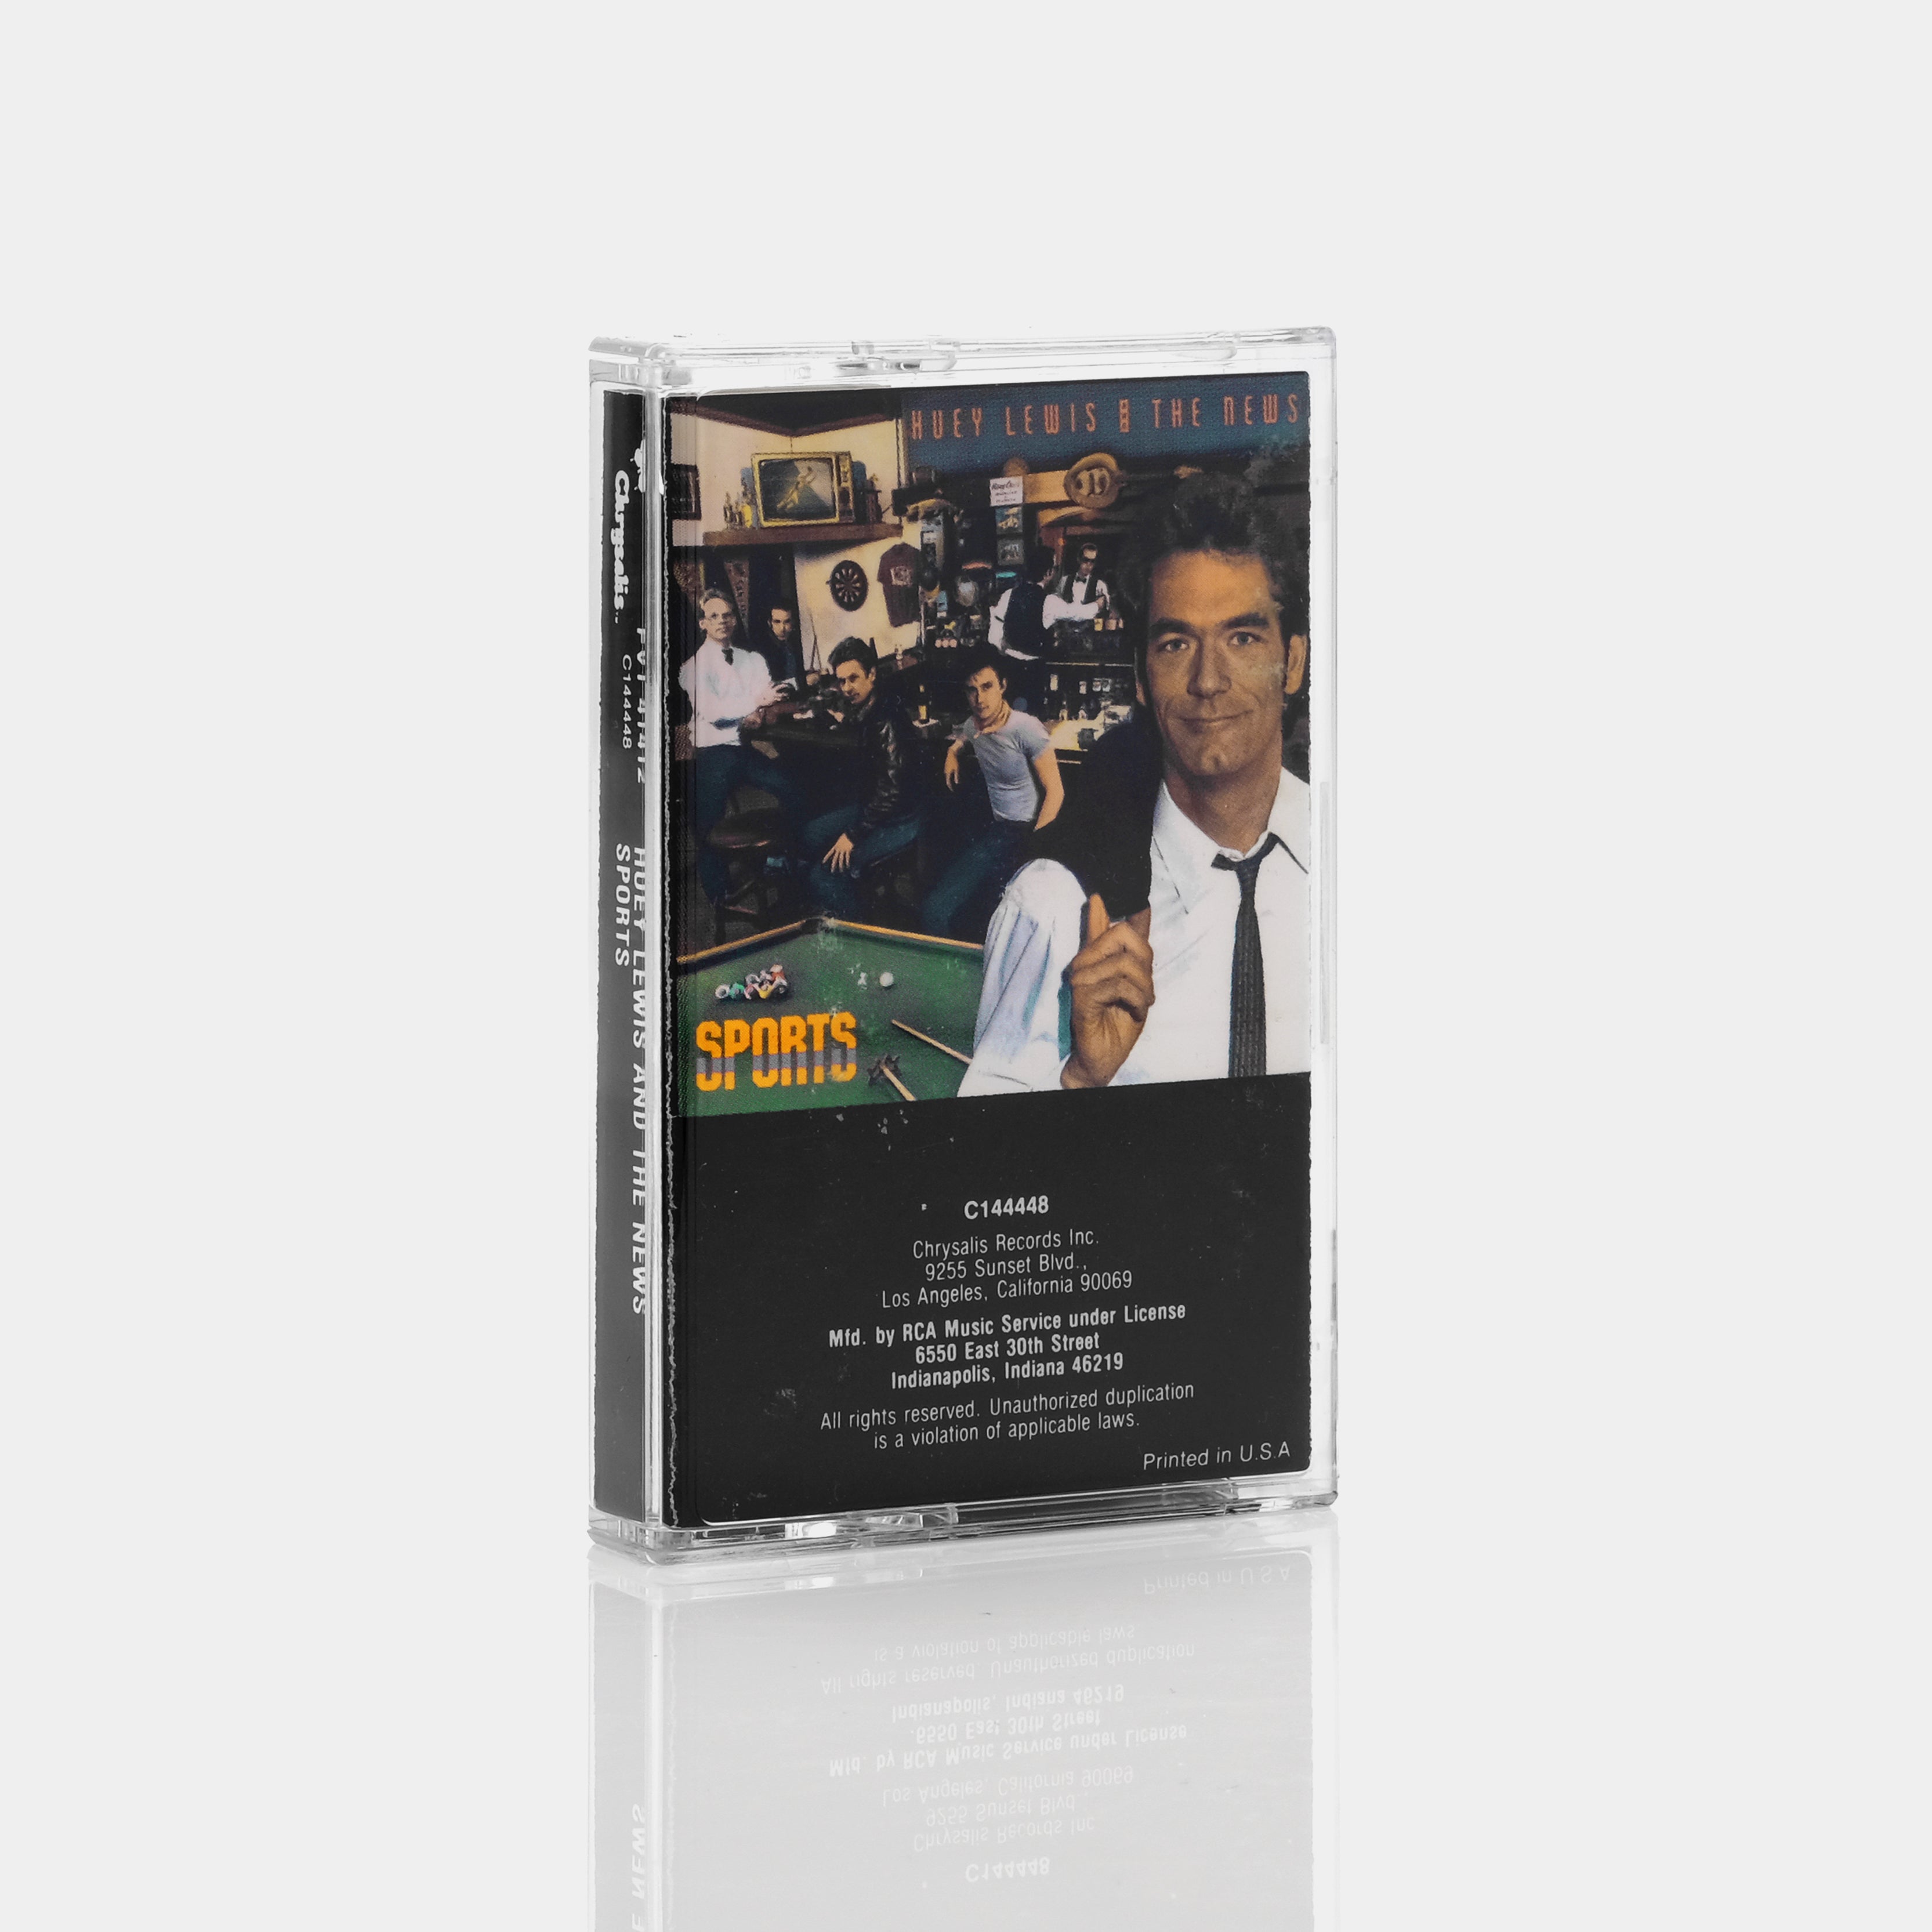 Huey Lewis And The News - Sports Cassette Tape